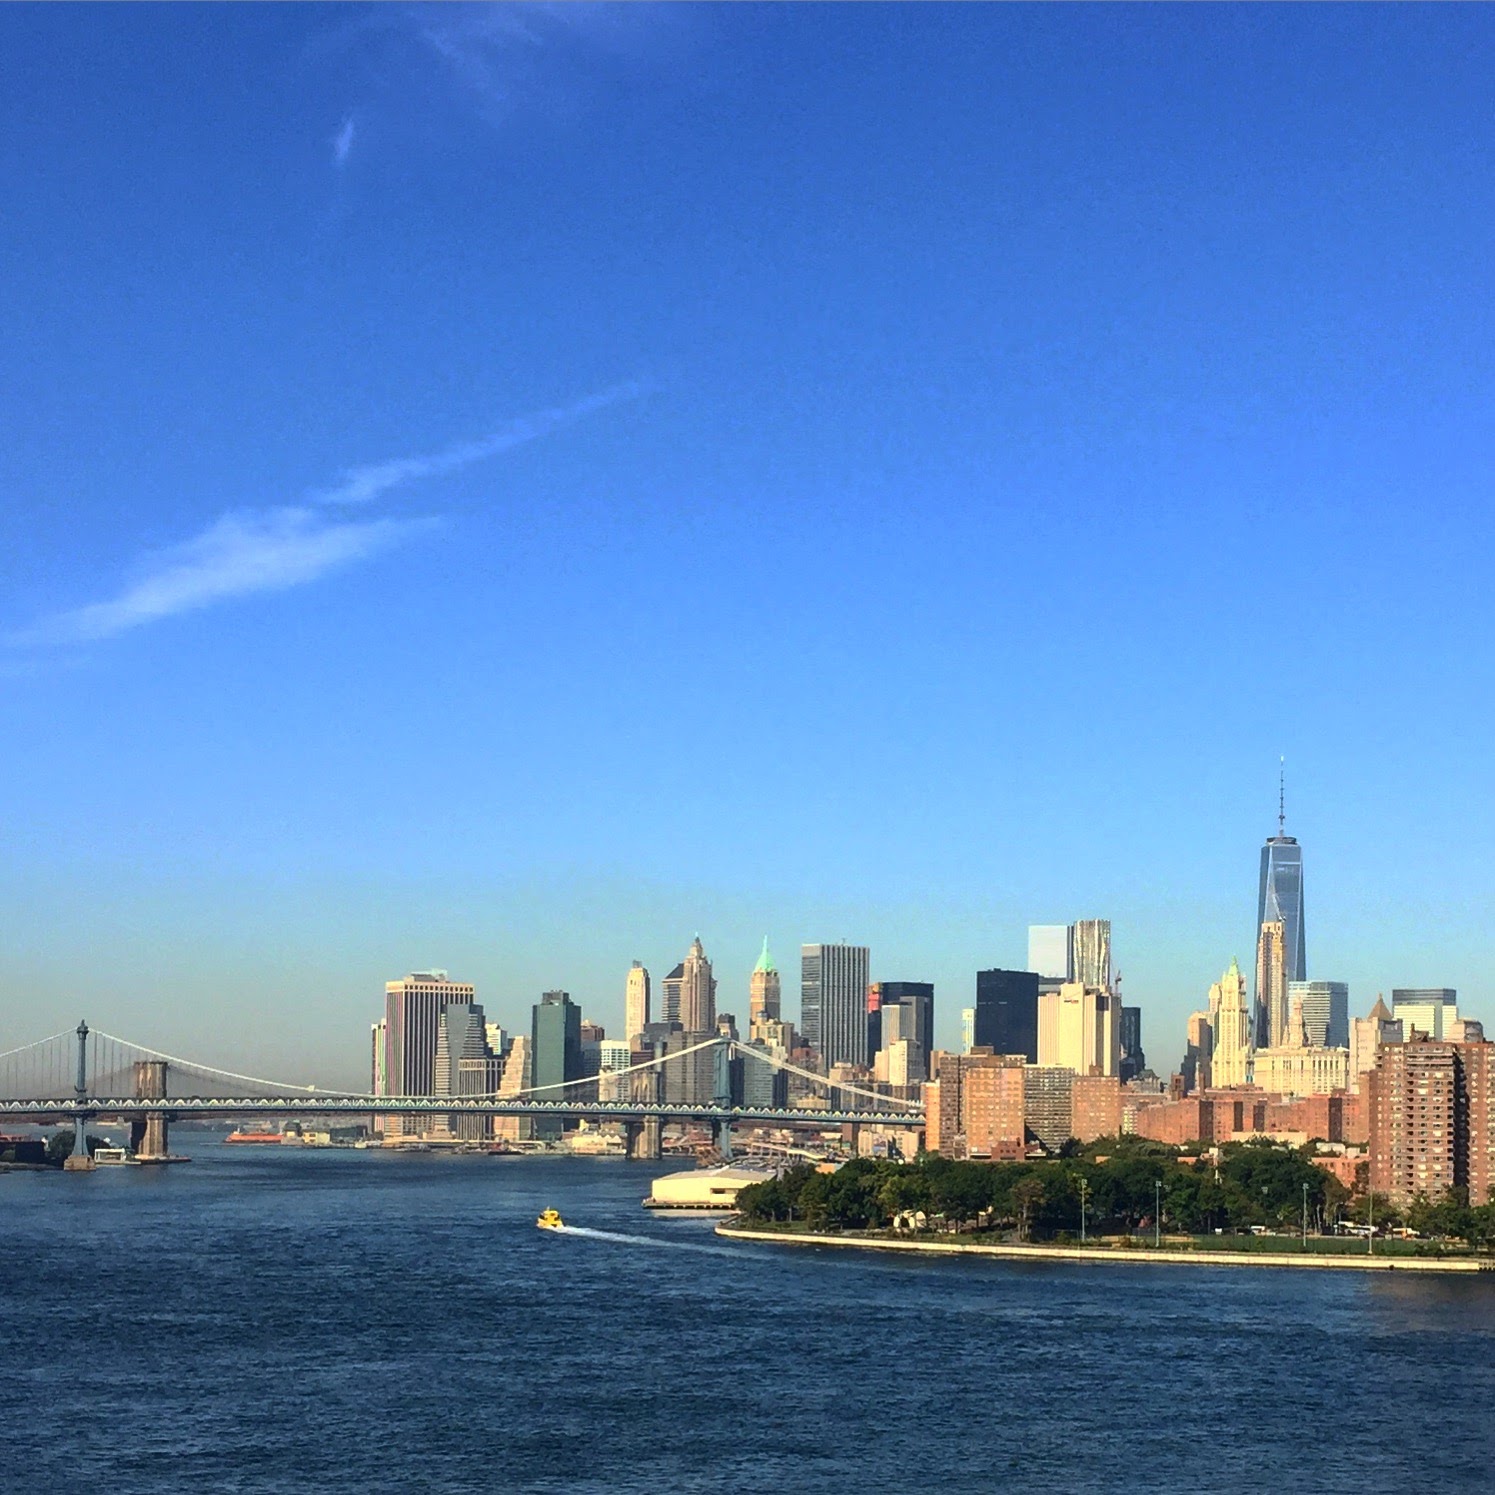 new york skyline from williamsburg bridge - Travel Contests: January 6, 2016 - Skiing, NYC, St Lucia & more